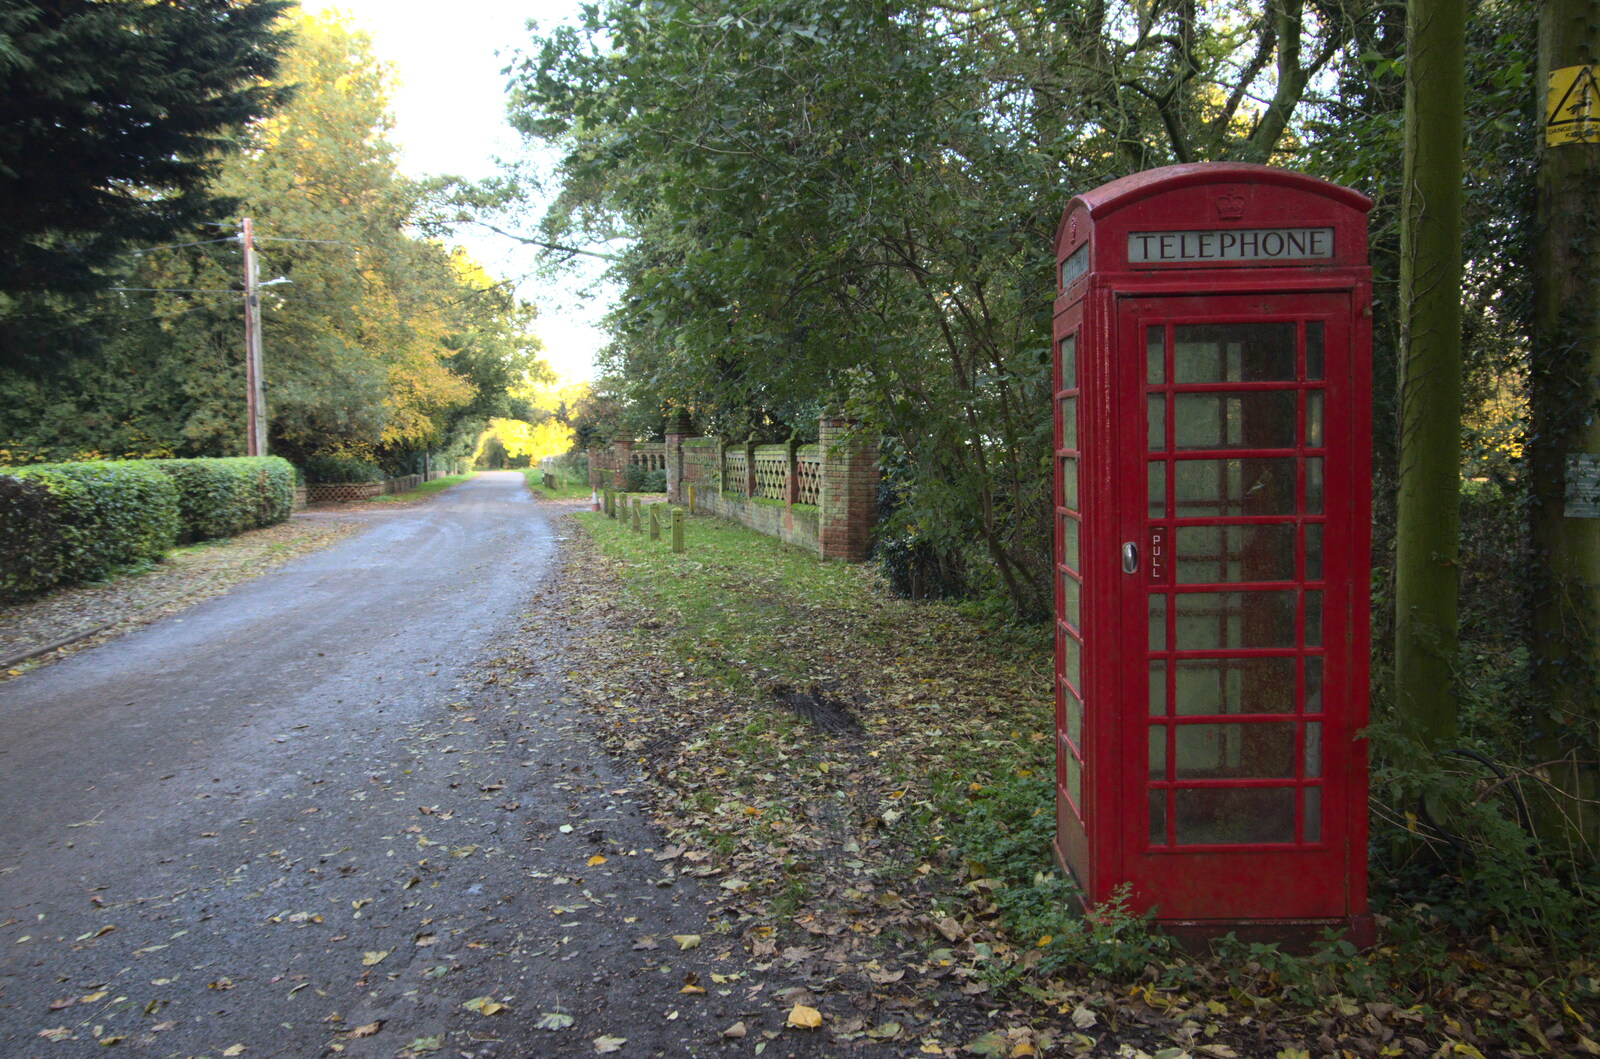 Brome Street's K6 phone box from A Walk Around the Avenue, Brome, Suffolk - 25th October 2020